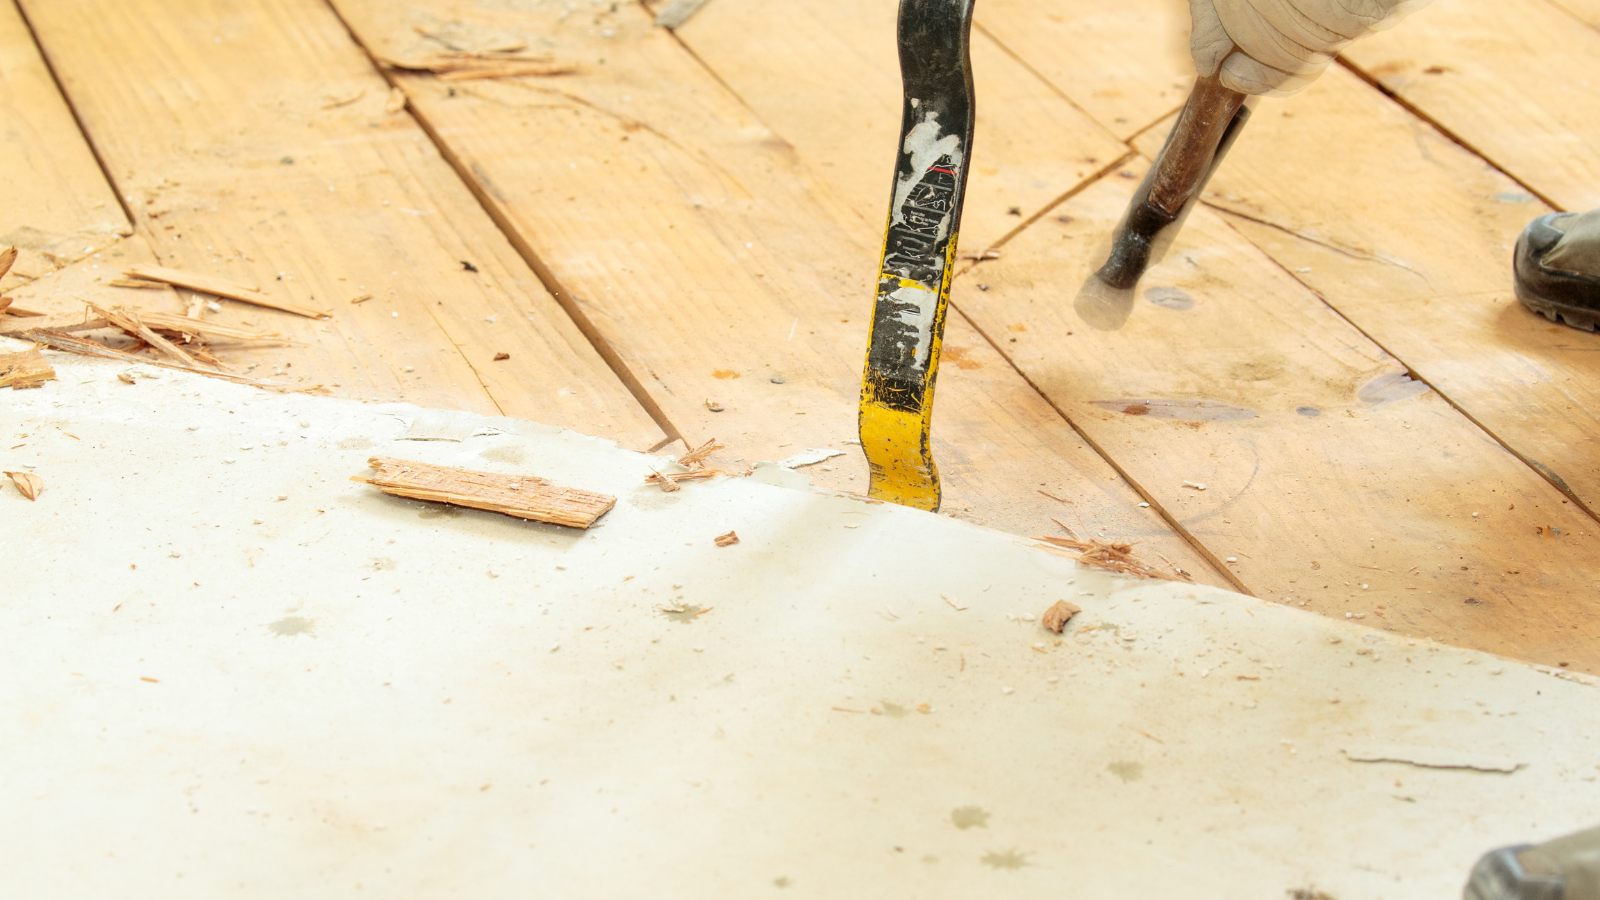 A person is using a spatula to remove wallpaper from a wooden floor.